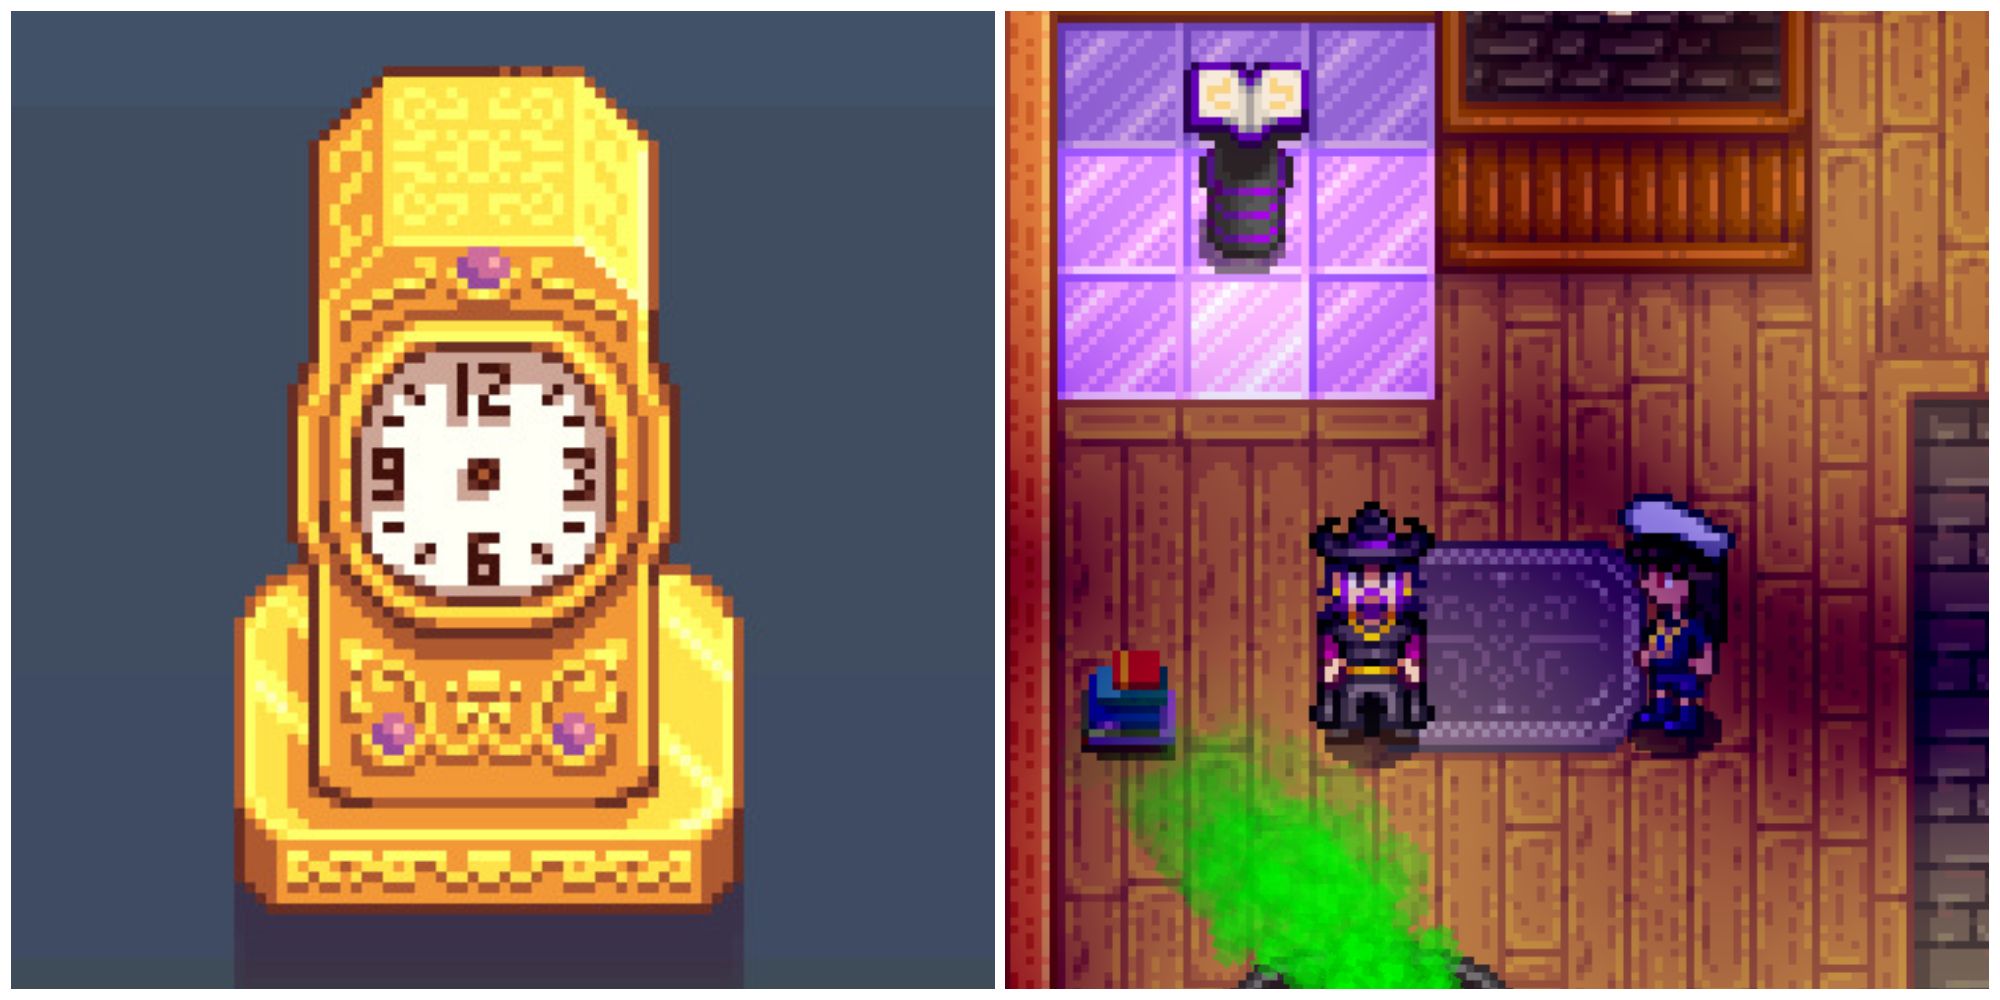 Split image of the Gold Clock building and a character in the Wizard's Tower in Stardew Valley